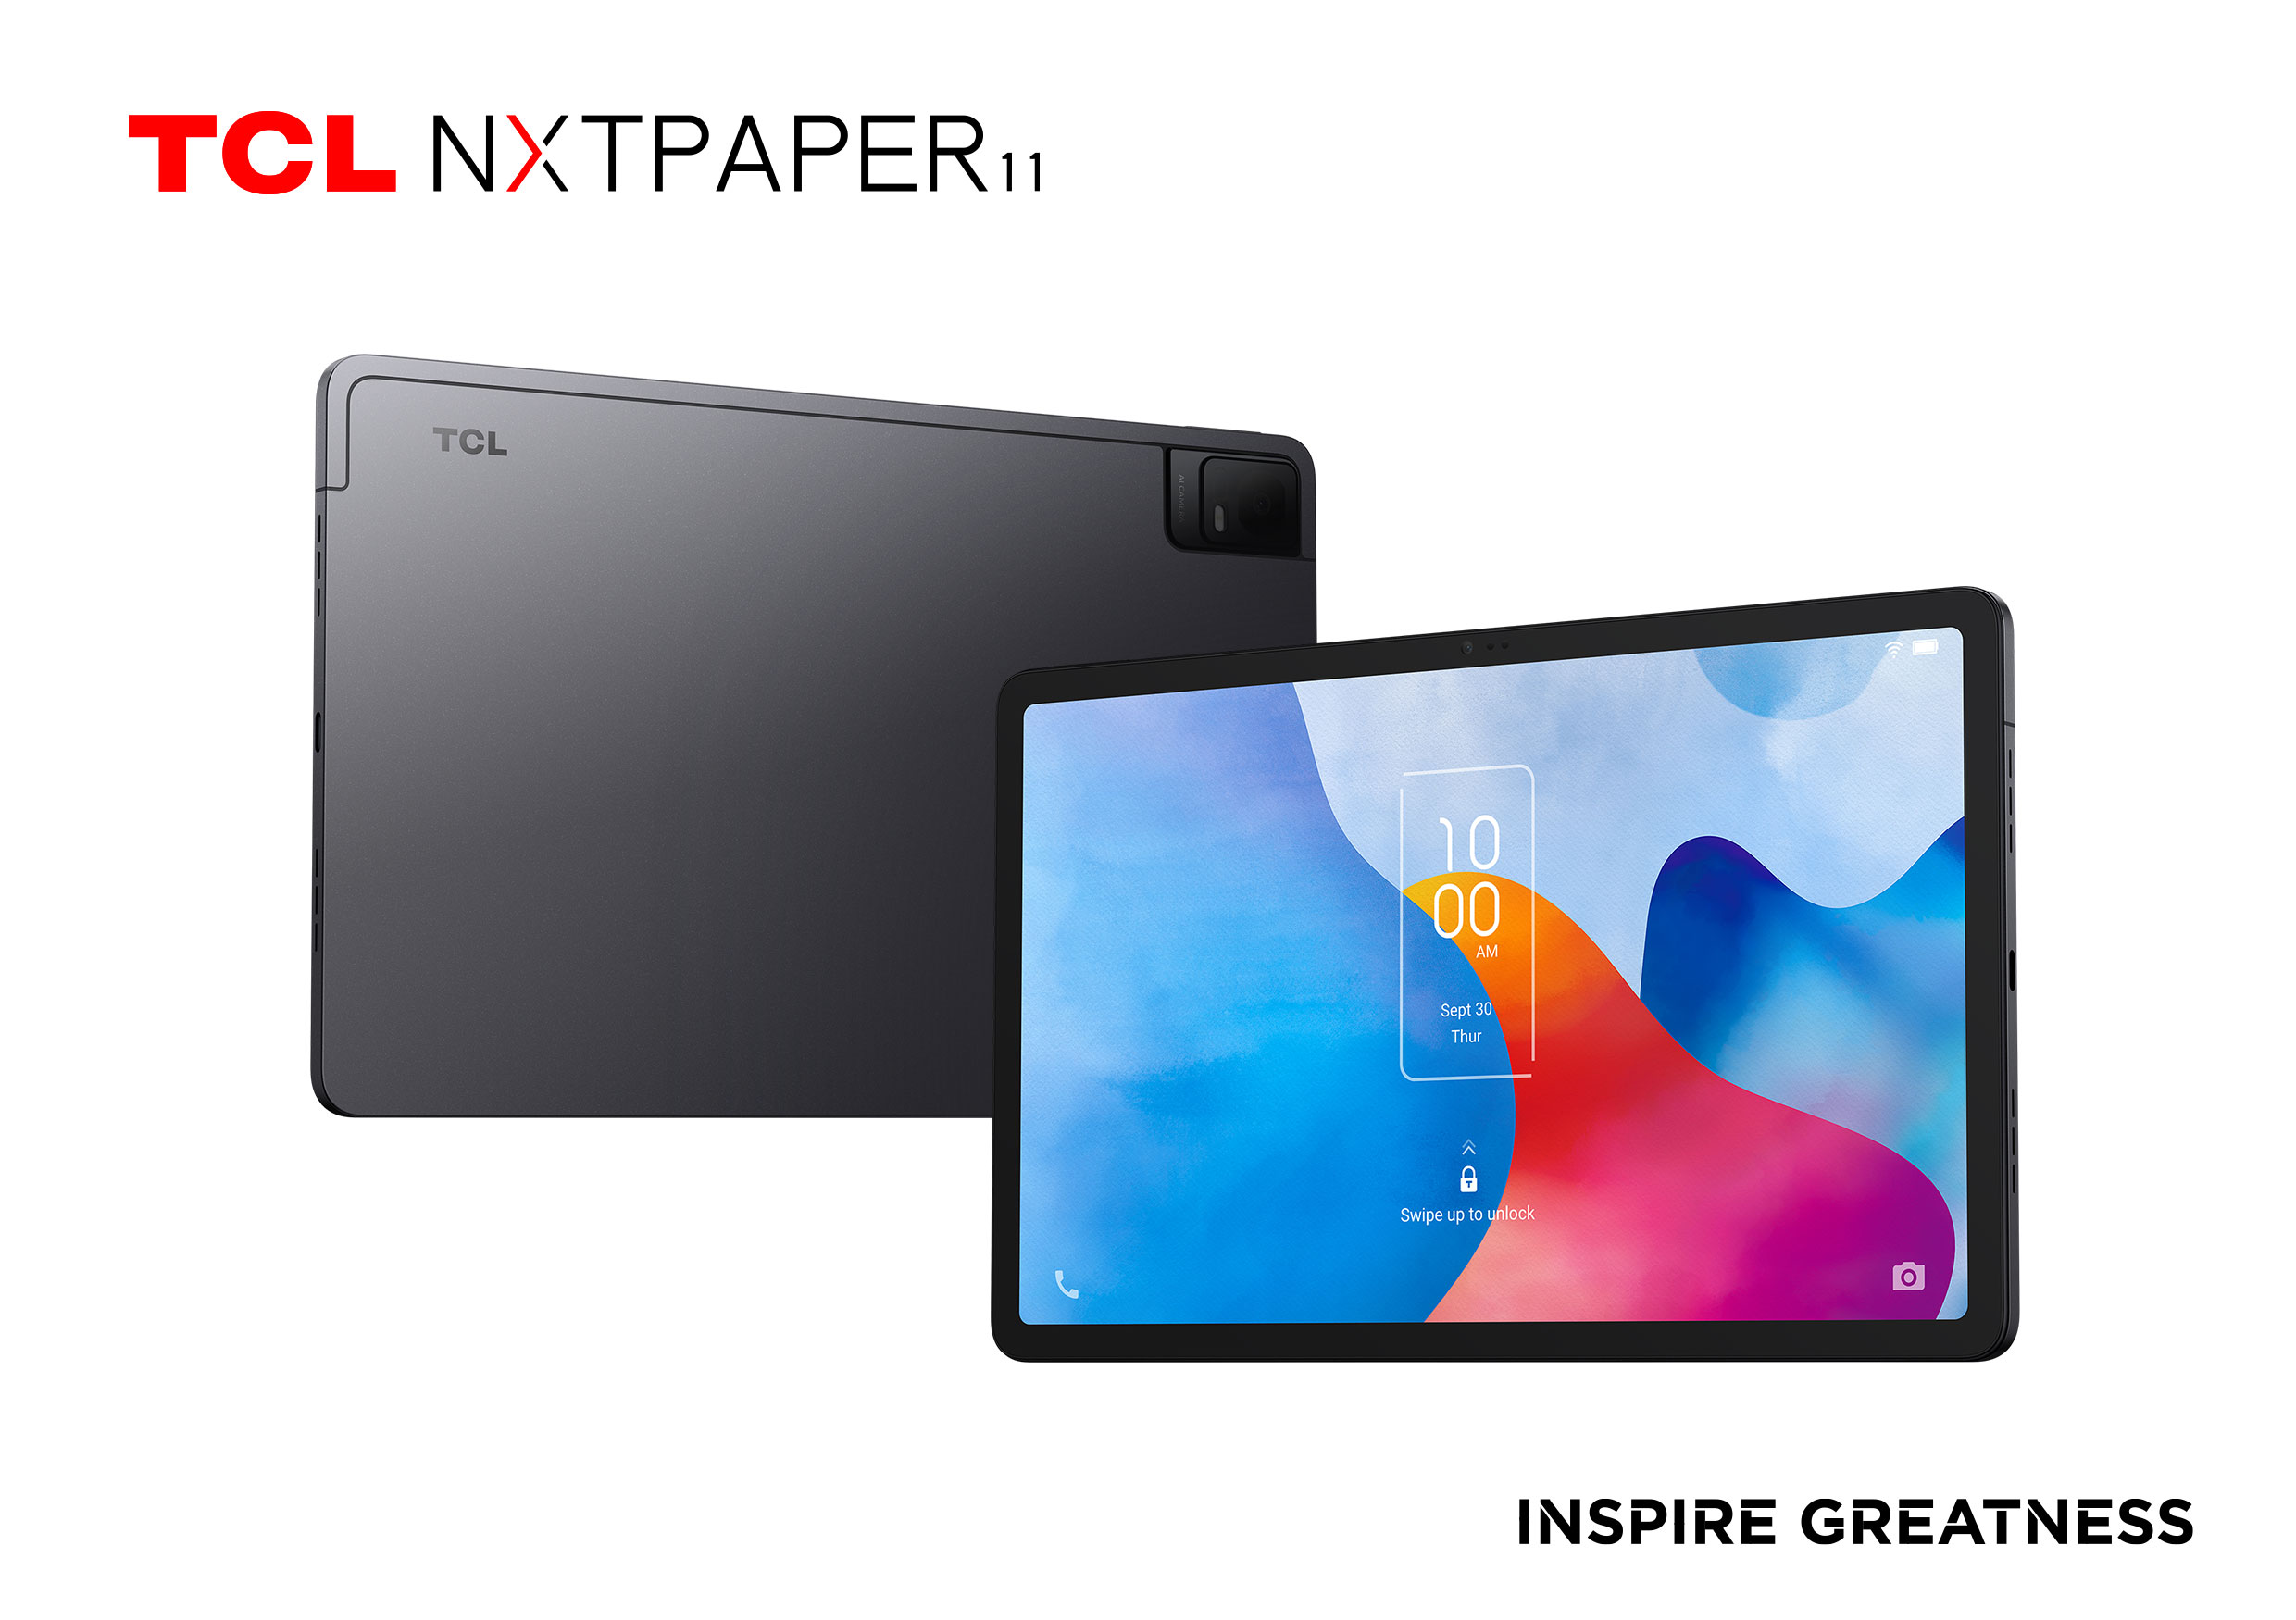 MWC 2023] TCL annuncia i tablet TCL NXTPAPER 11 e TCL TAB 11 